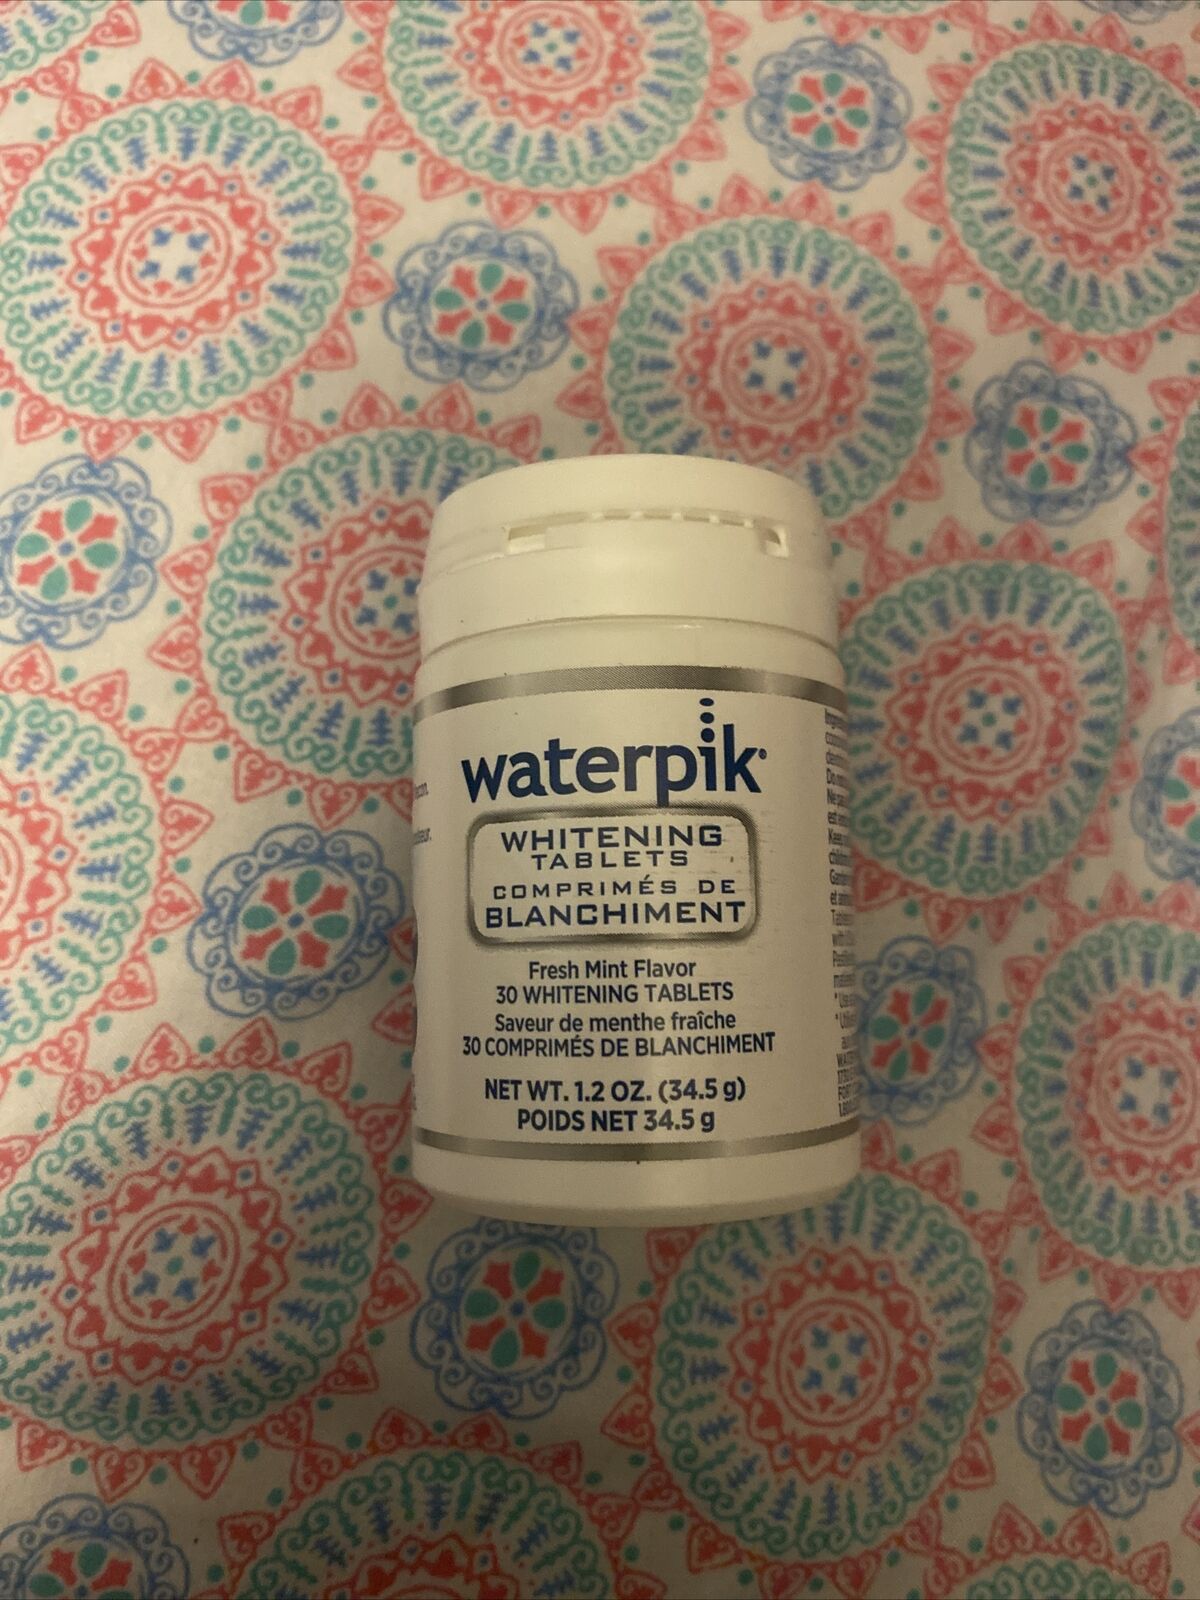 Waterpik Whitening Water Flosser Refill Tablets for Use with Waterpik Exp 12/23